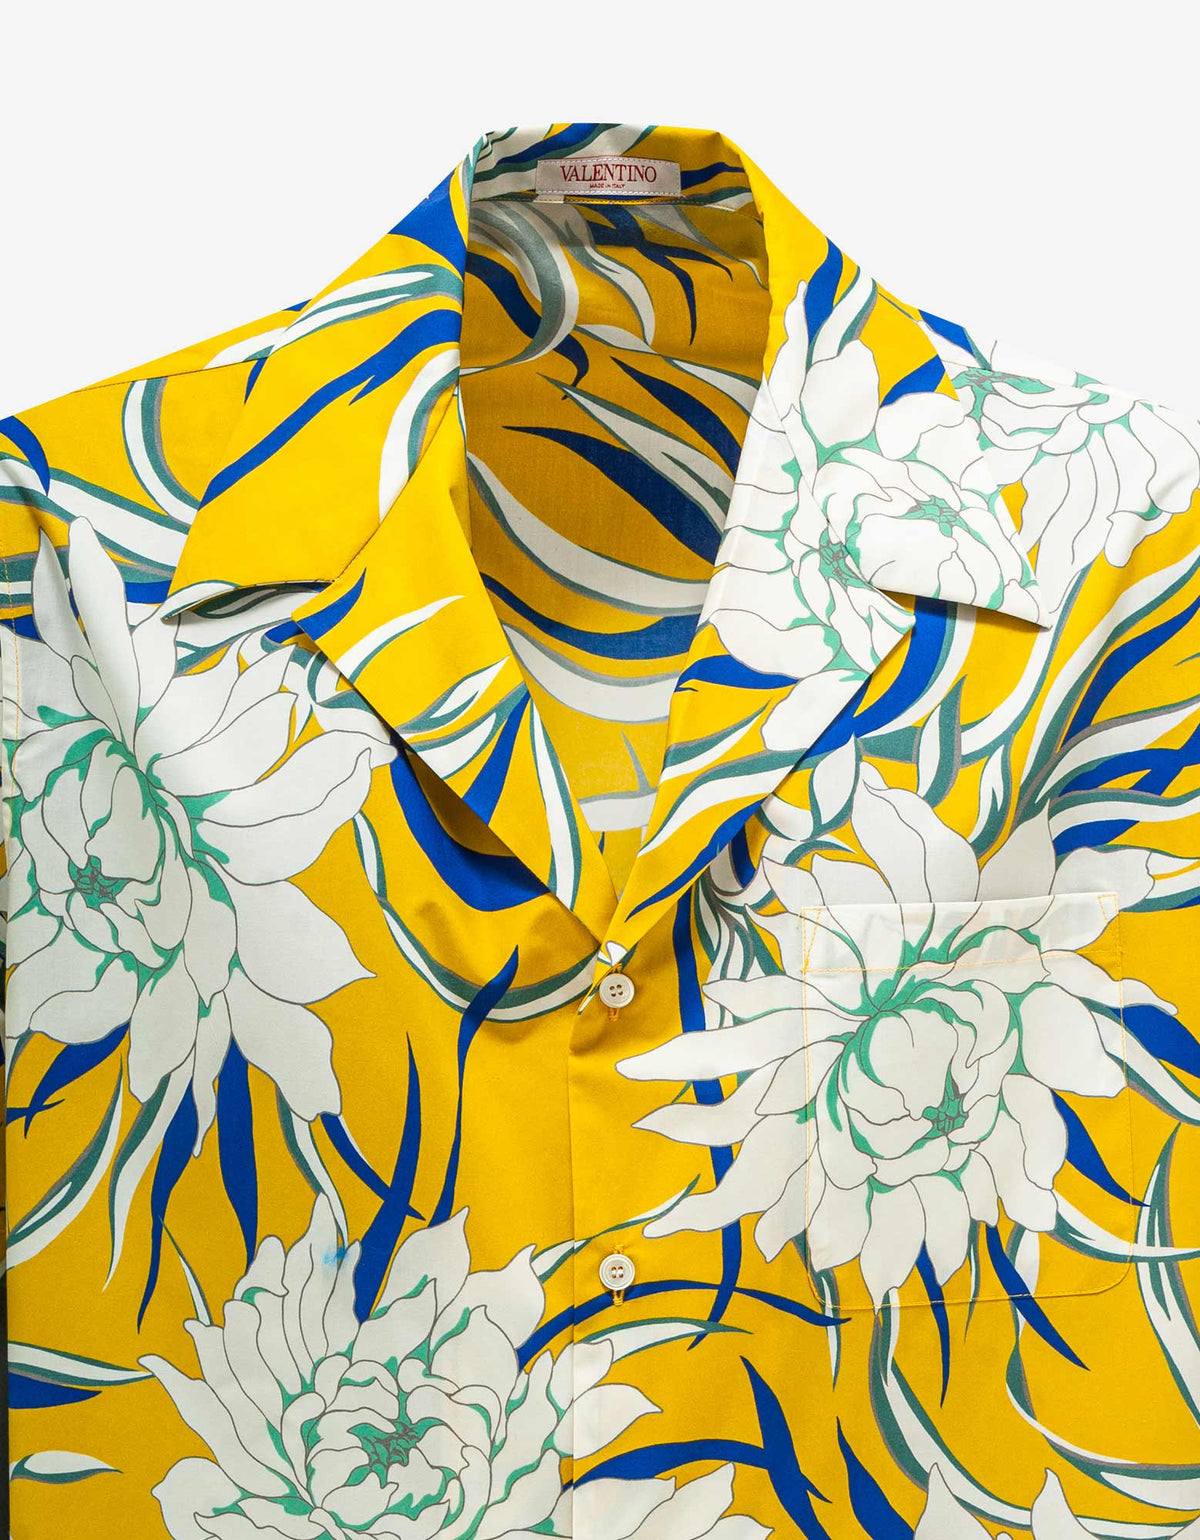 Valentino Street Flowers Couture Peonies Print Bowling Shirt